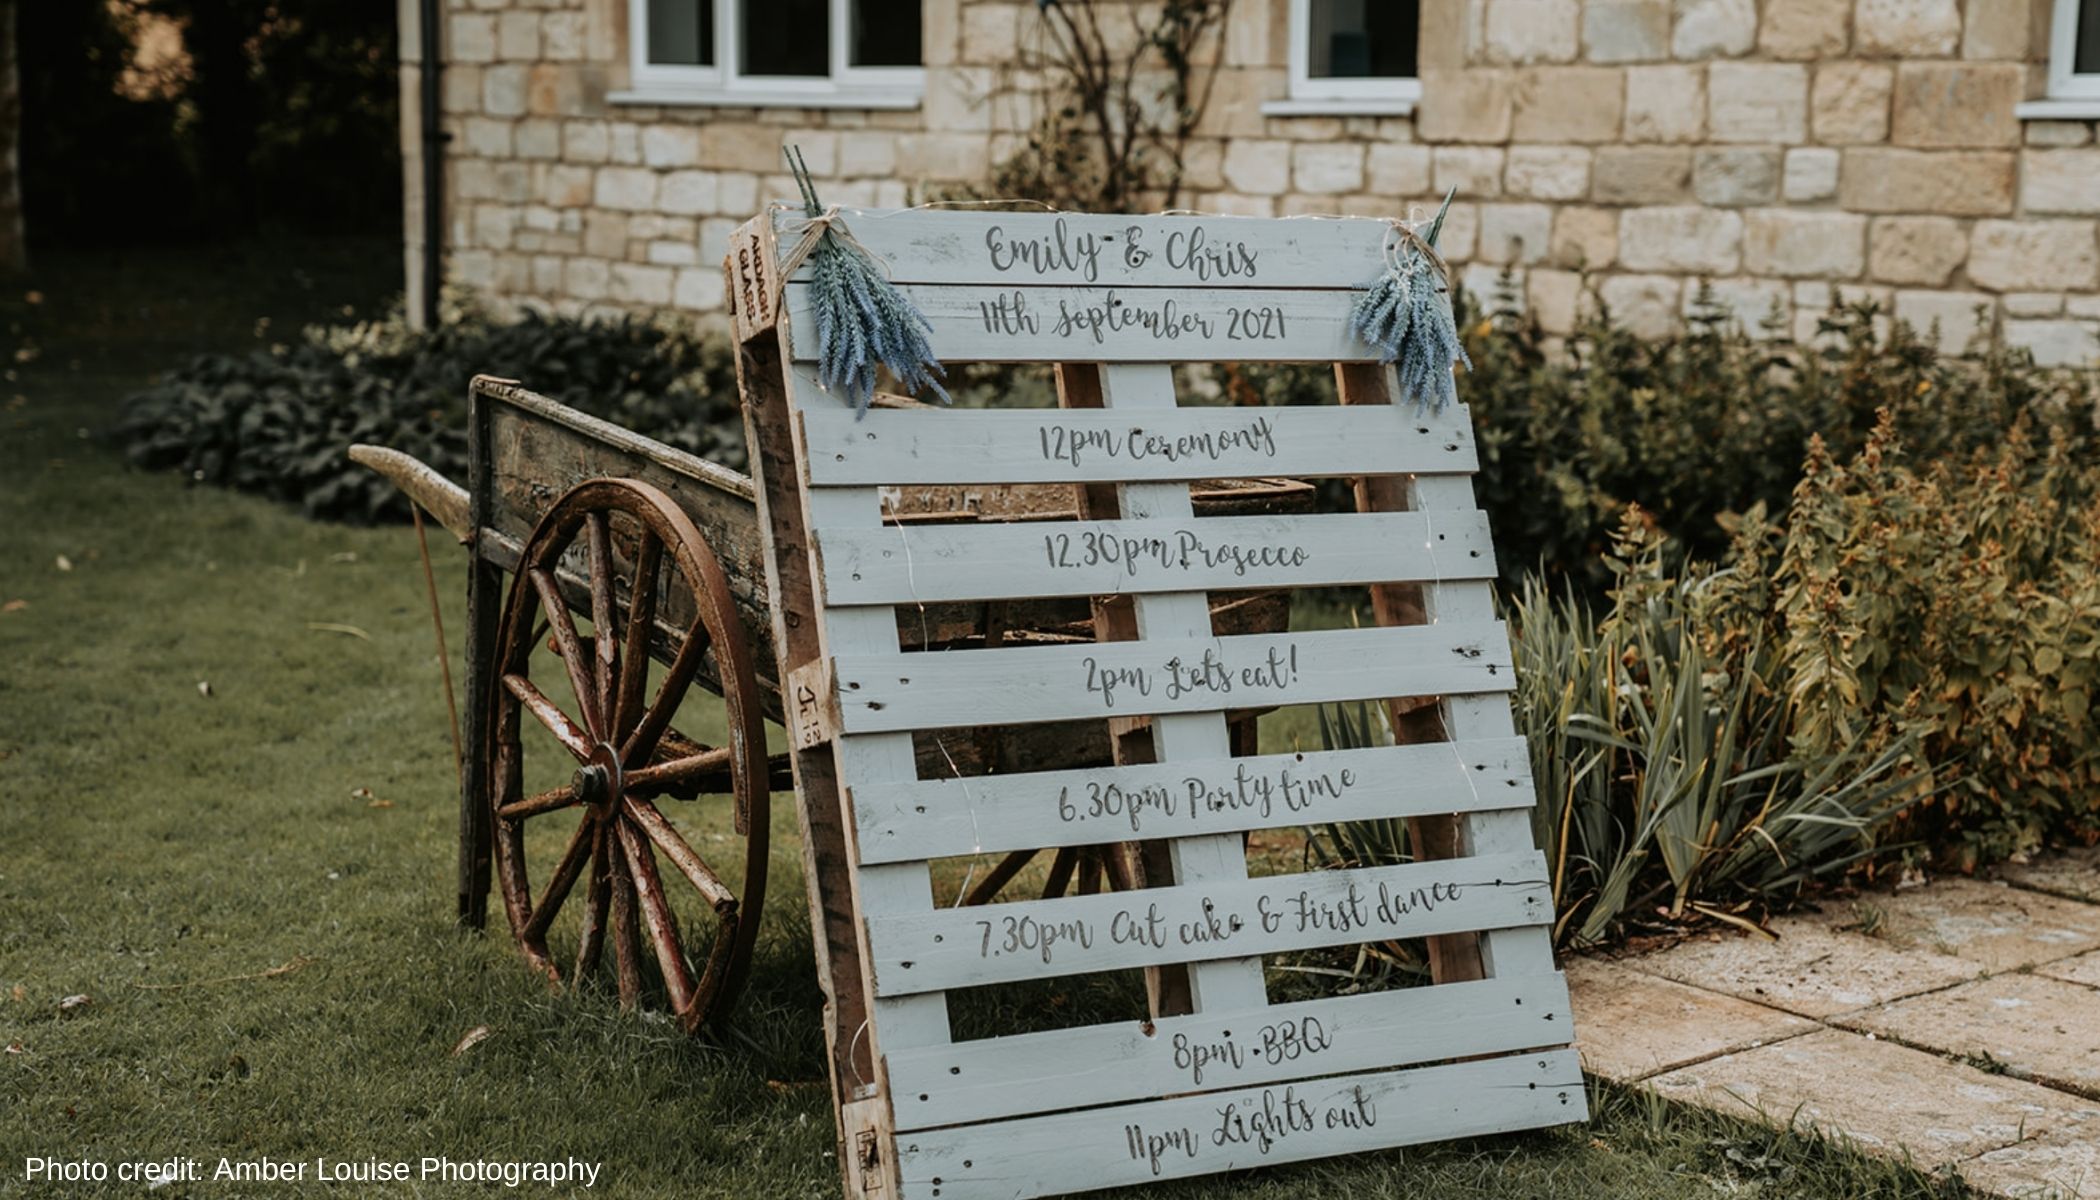 Personalise your wedding day